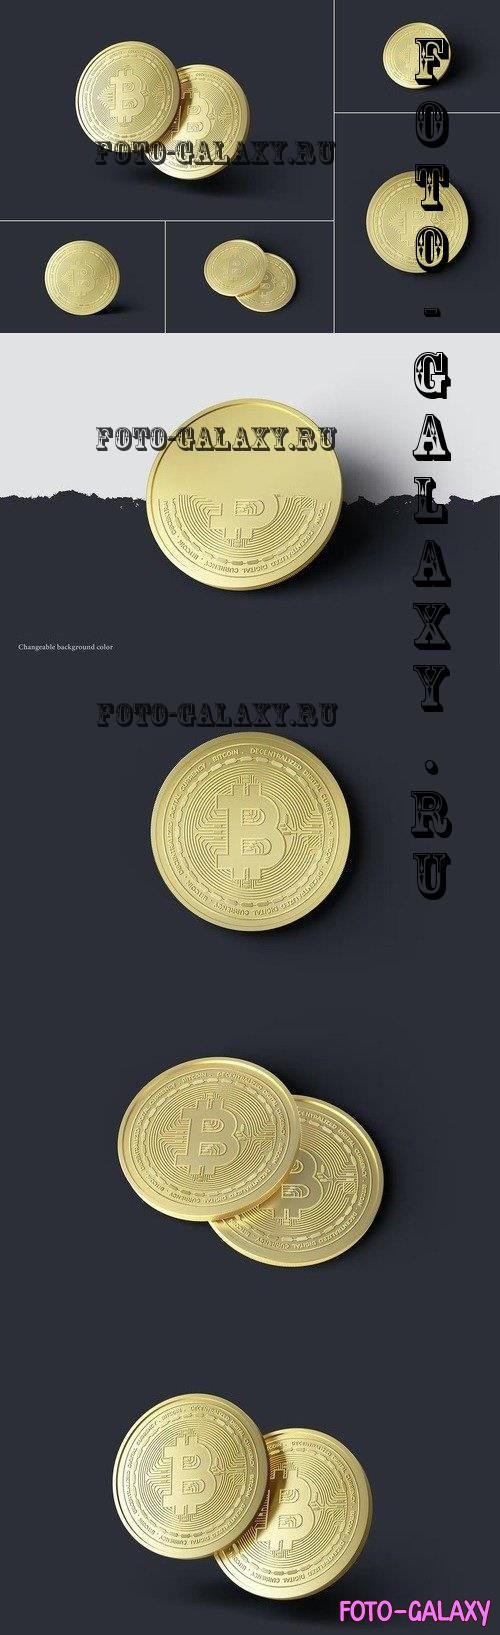 Gold Coin / Cryptocurrency Mockups - 10274831